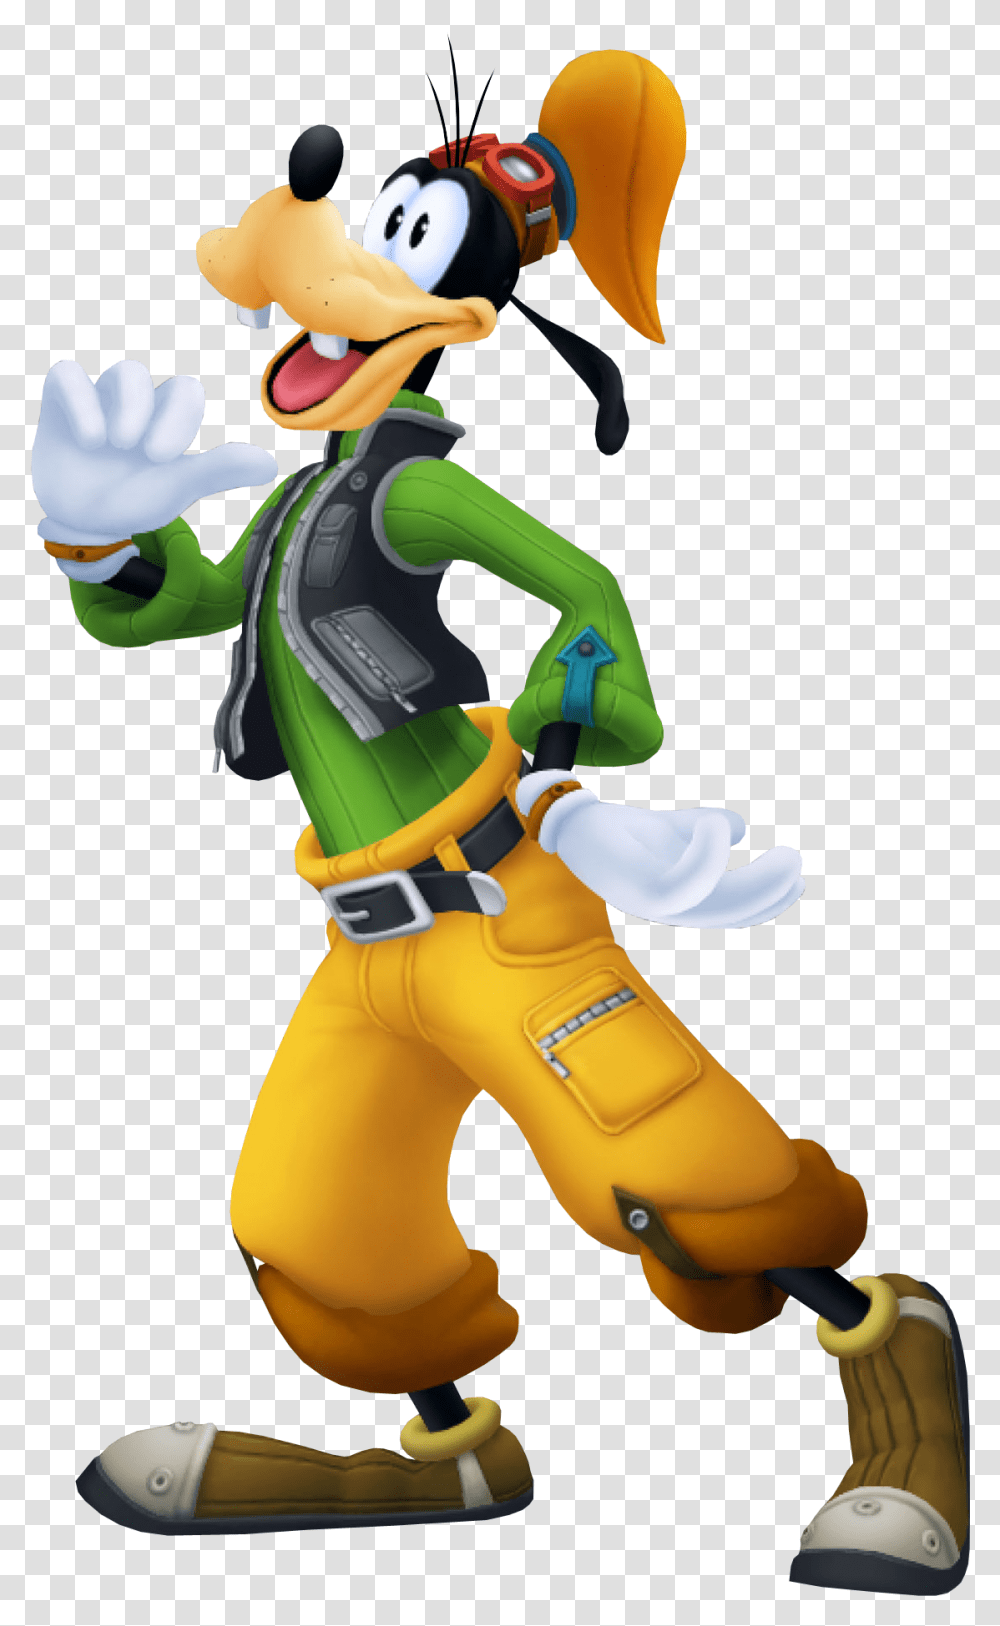 Disney Pluto Images All Disney Kingdom Hearts Goofy, Toy, Clothing, Apparel, Figurine Transparent Png